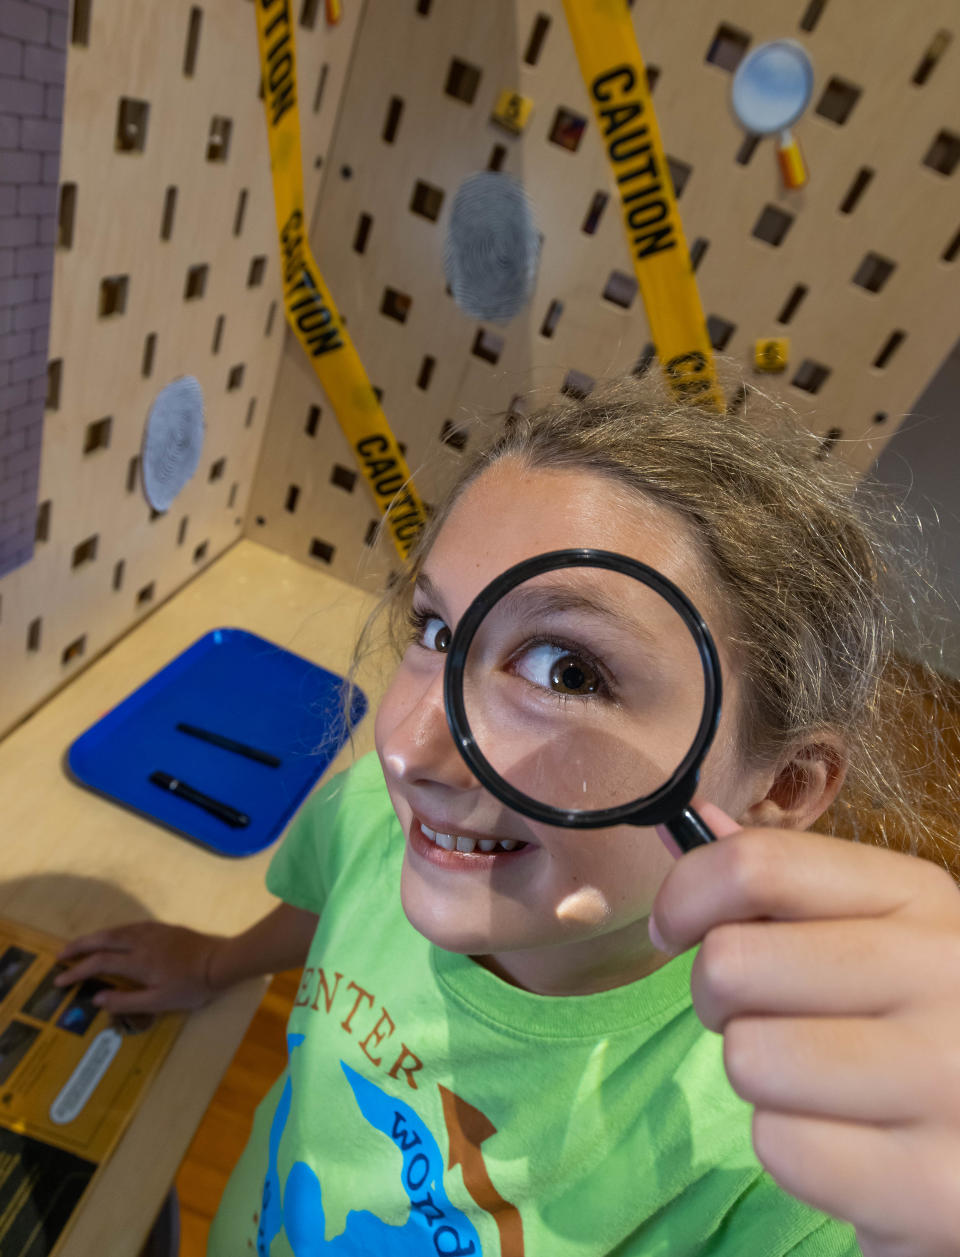 Violet Messenger, 10, checks out a magnifying glass in the fingerprint station in the "Spy Science" exhibit at the Discovery Center in Ocala.